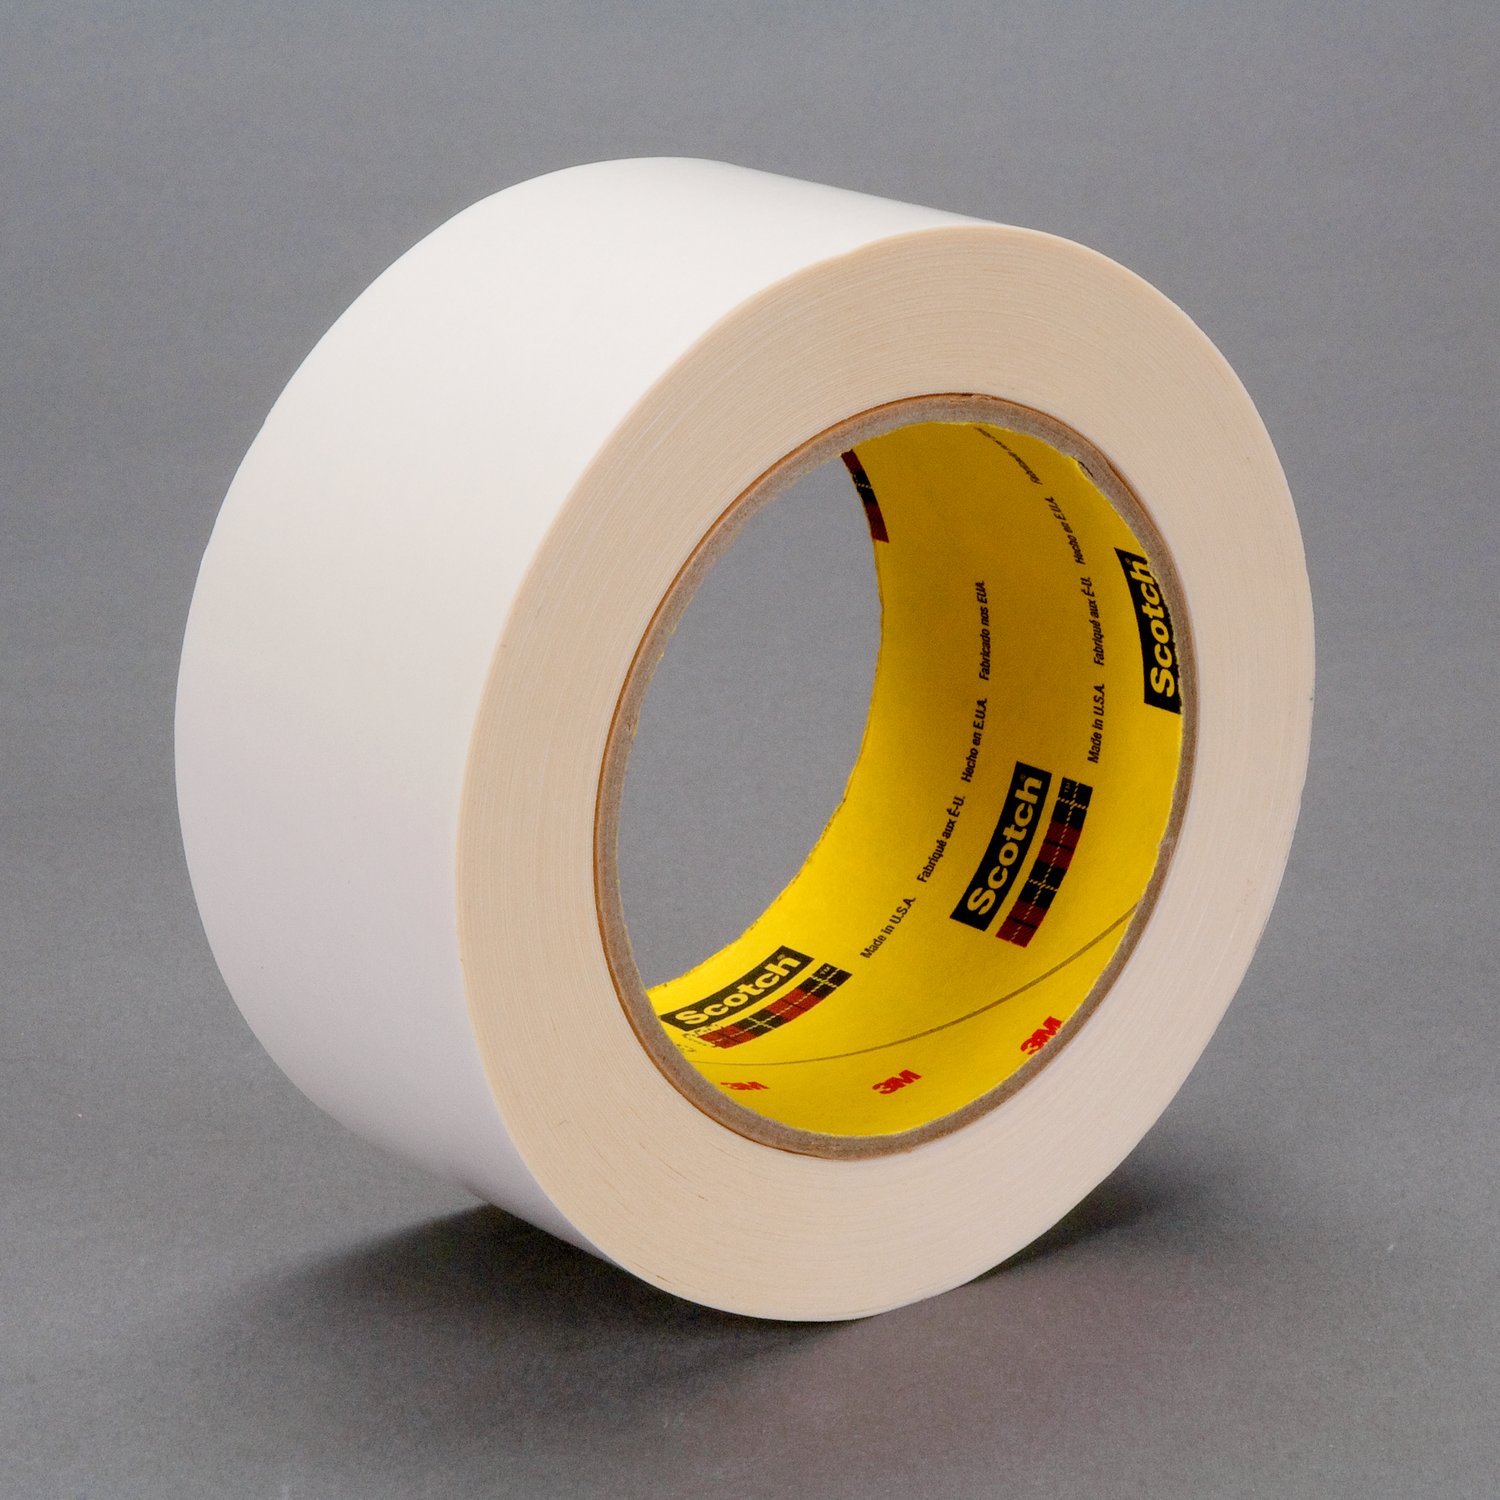 7100132869 - 3M Repulpable Double Coated Splicing Tape 9038W, White, 3 mil, Roll,
Config